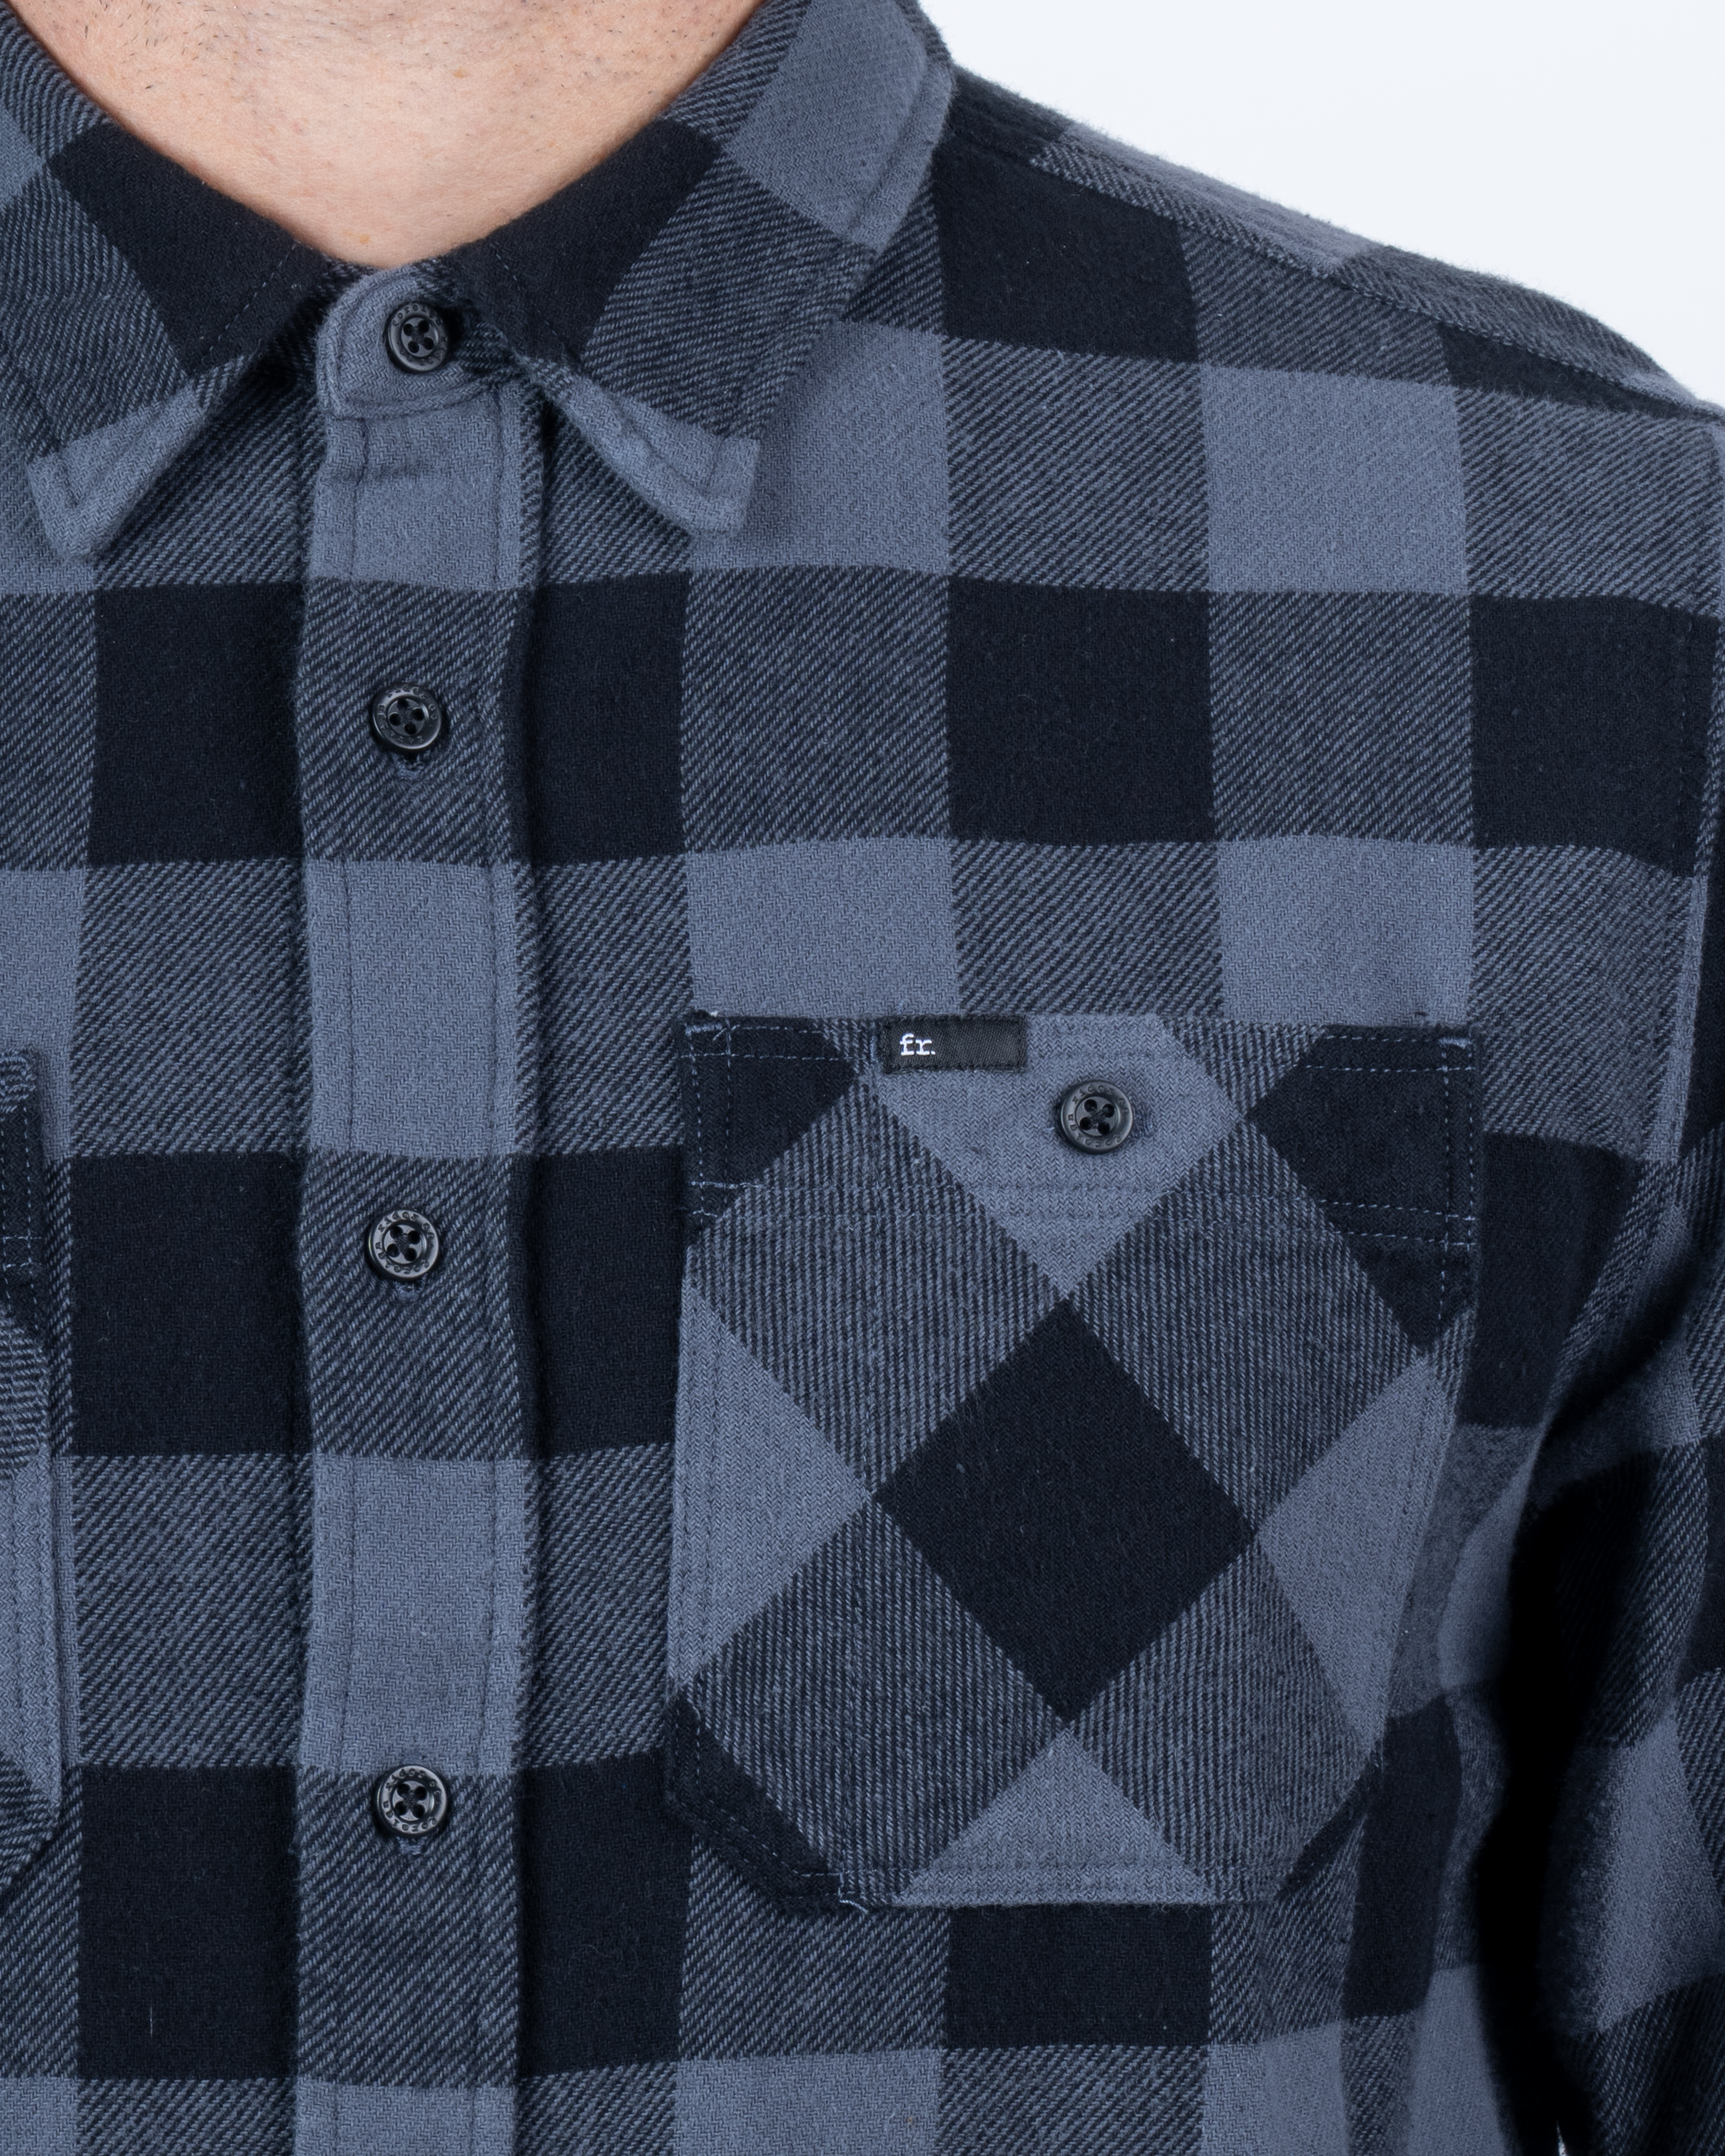 Foreign Rider Co Organic Cotton Black Flannel Plaid 01 Long Sleeve Button Up Shirt Button Chest Pocket